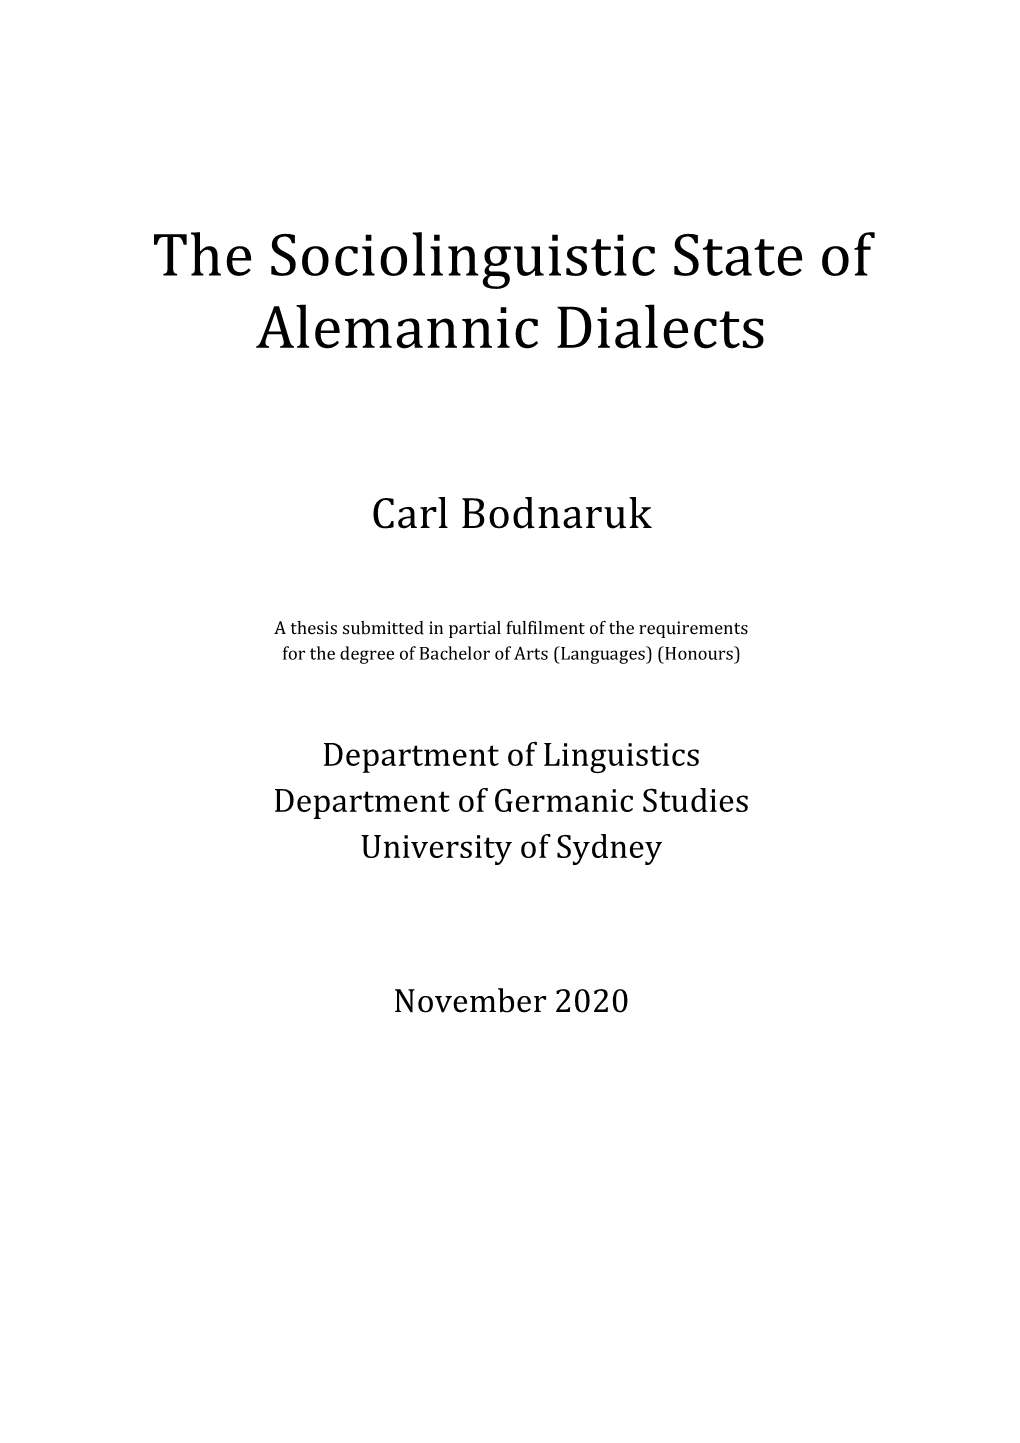 The Sociolinguistic State of Alemannic Dialects